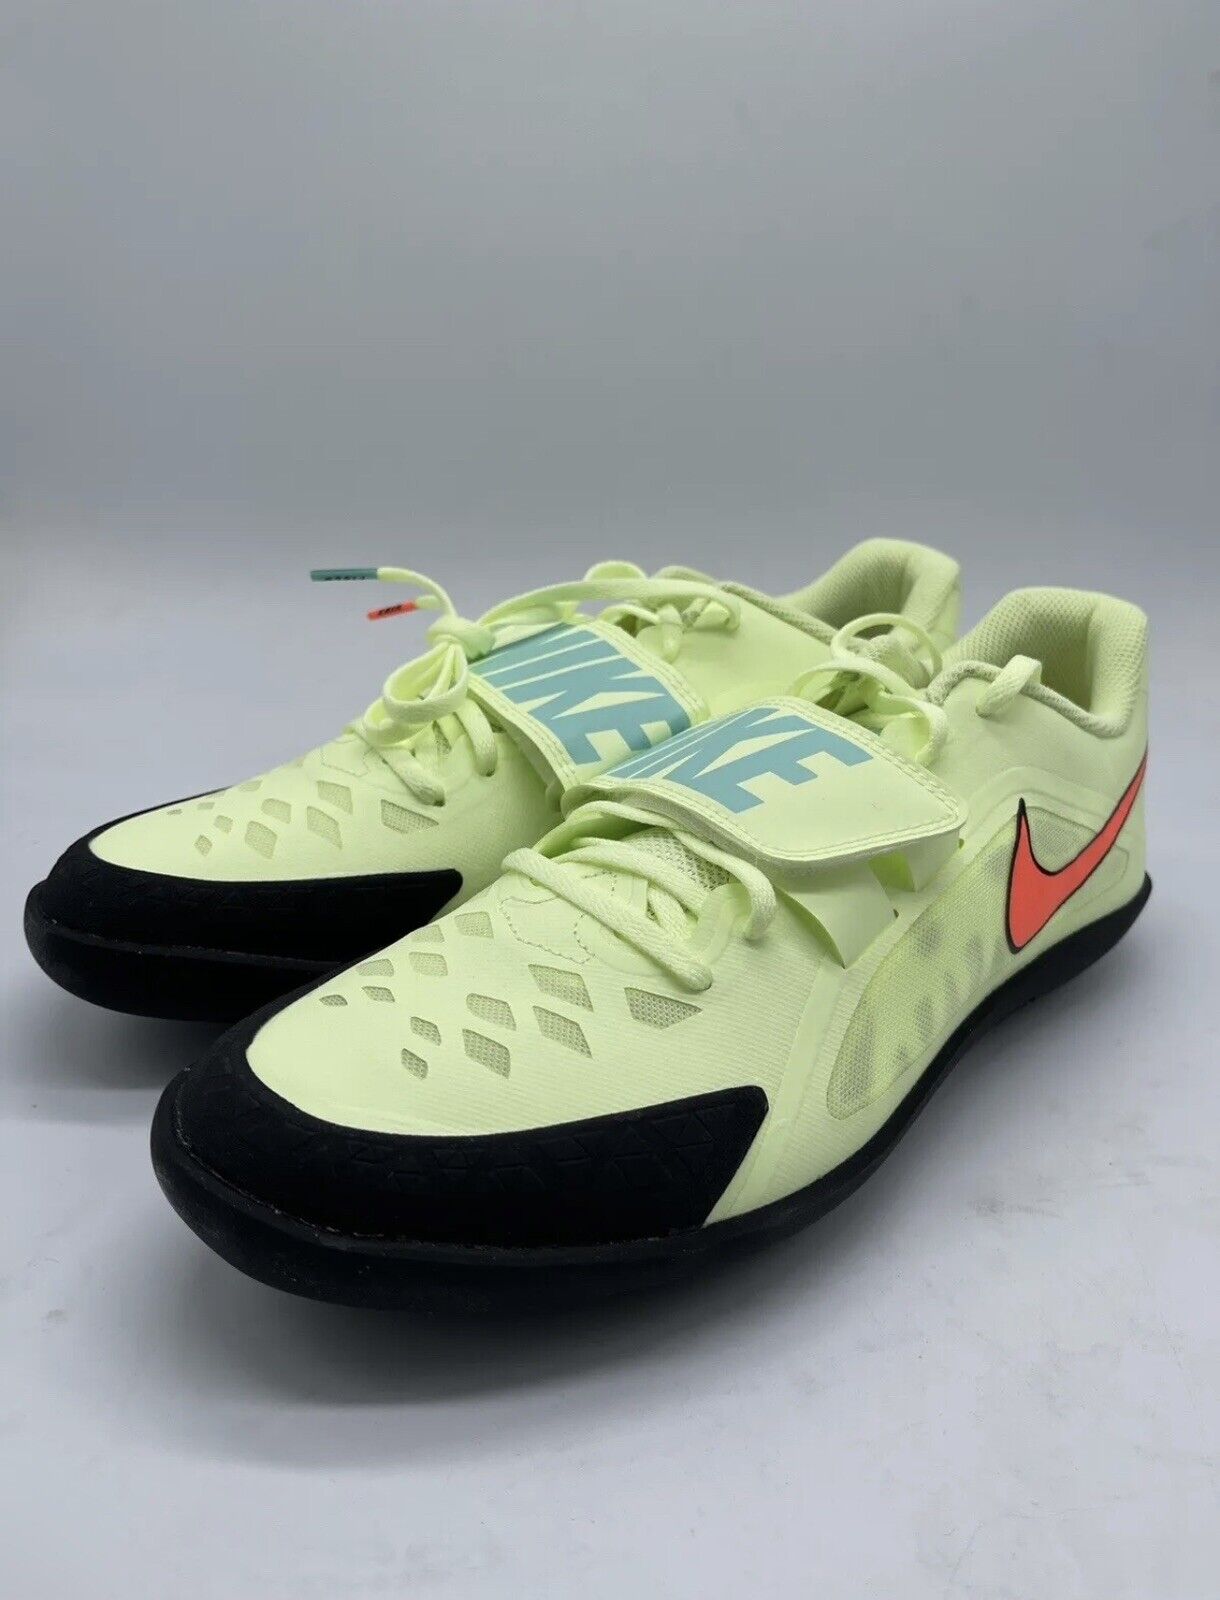 Nike Zoom Rival SD 2 Volt Green Throwing Unisex Shoes 685134-700 Mens Sizes  9-15